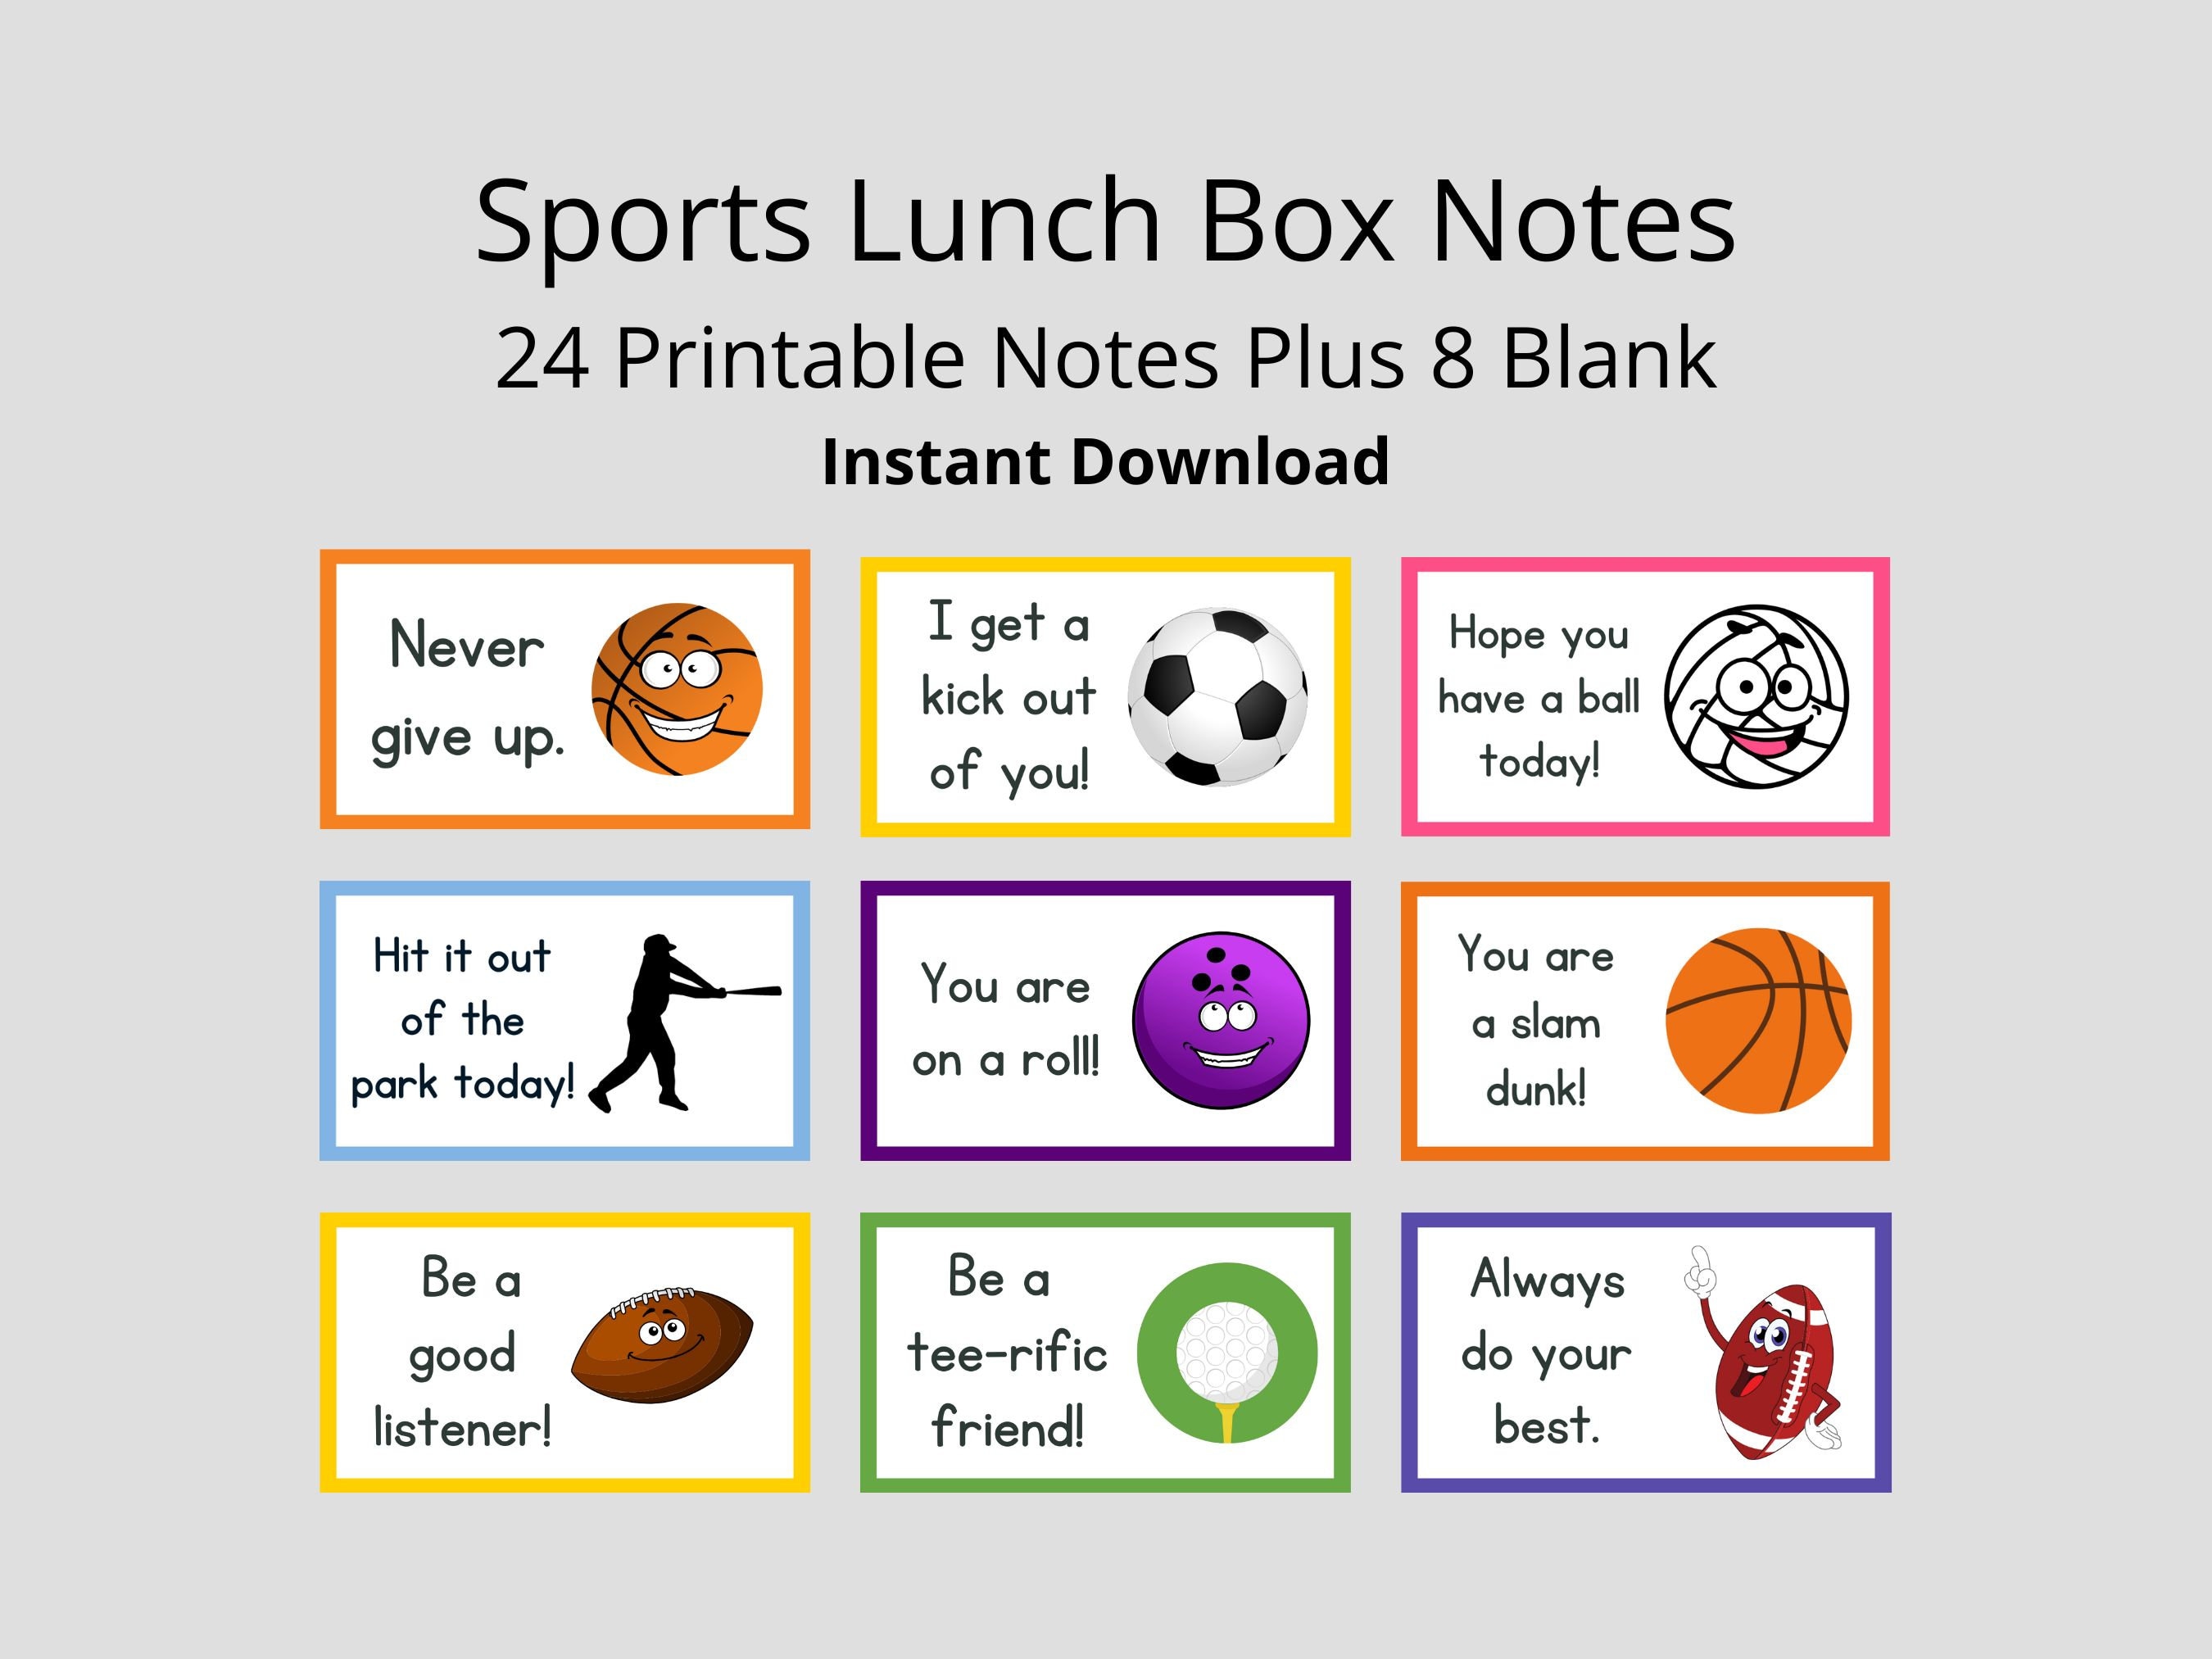 Lunch Box Notes For Kids Ages 6-8 - Trivia Questions and Answers